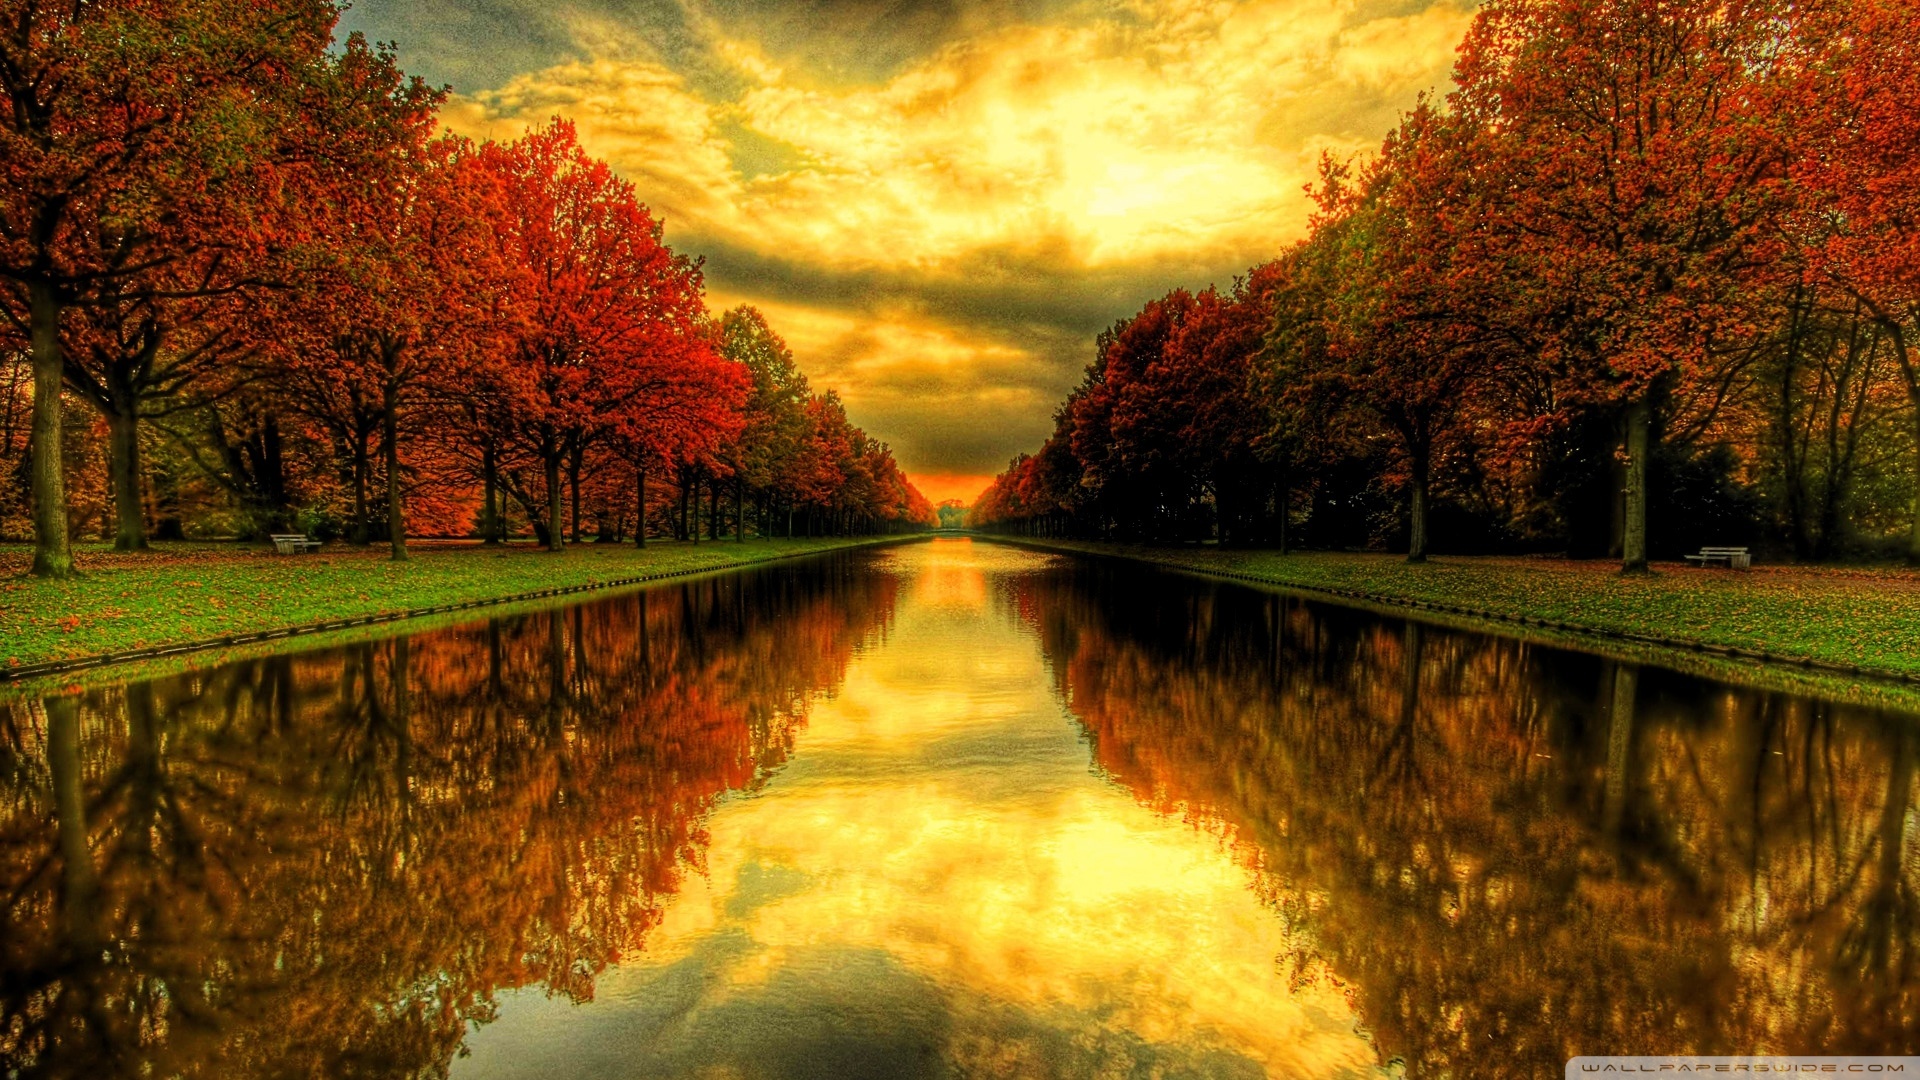 Collection of Autumn Desktop Backgrounds Hd on HDWallpapers